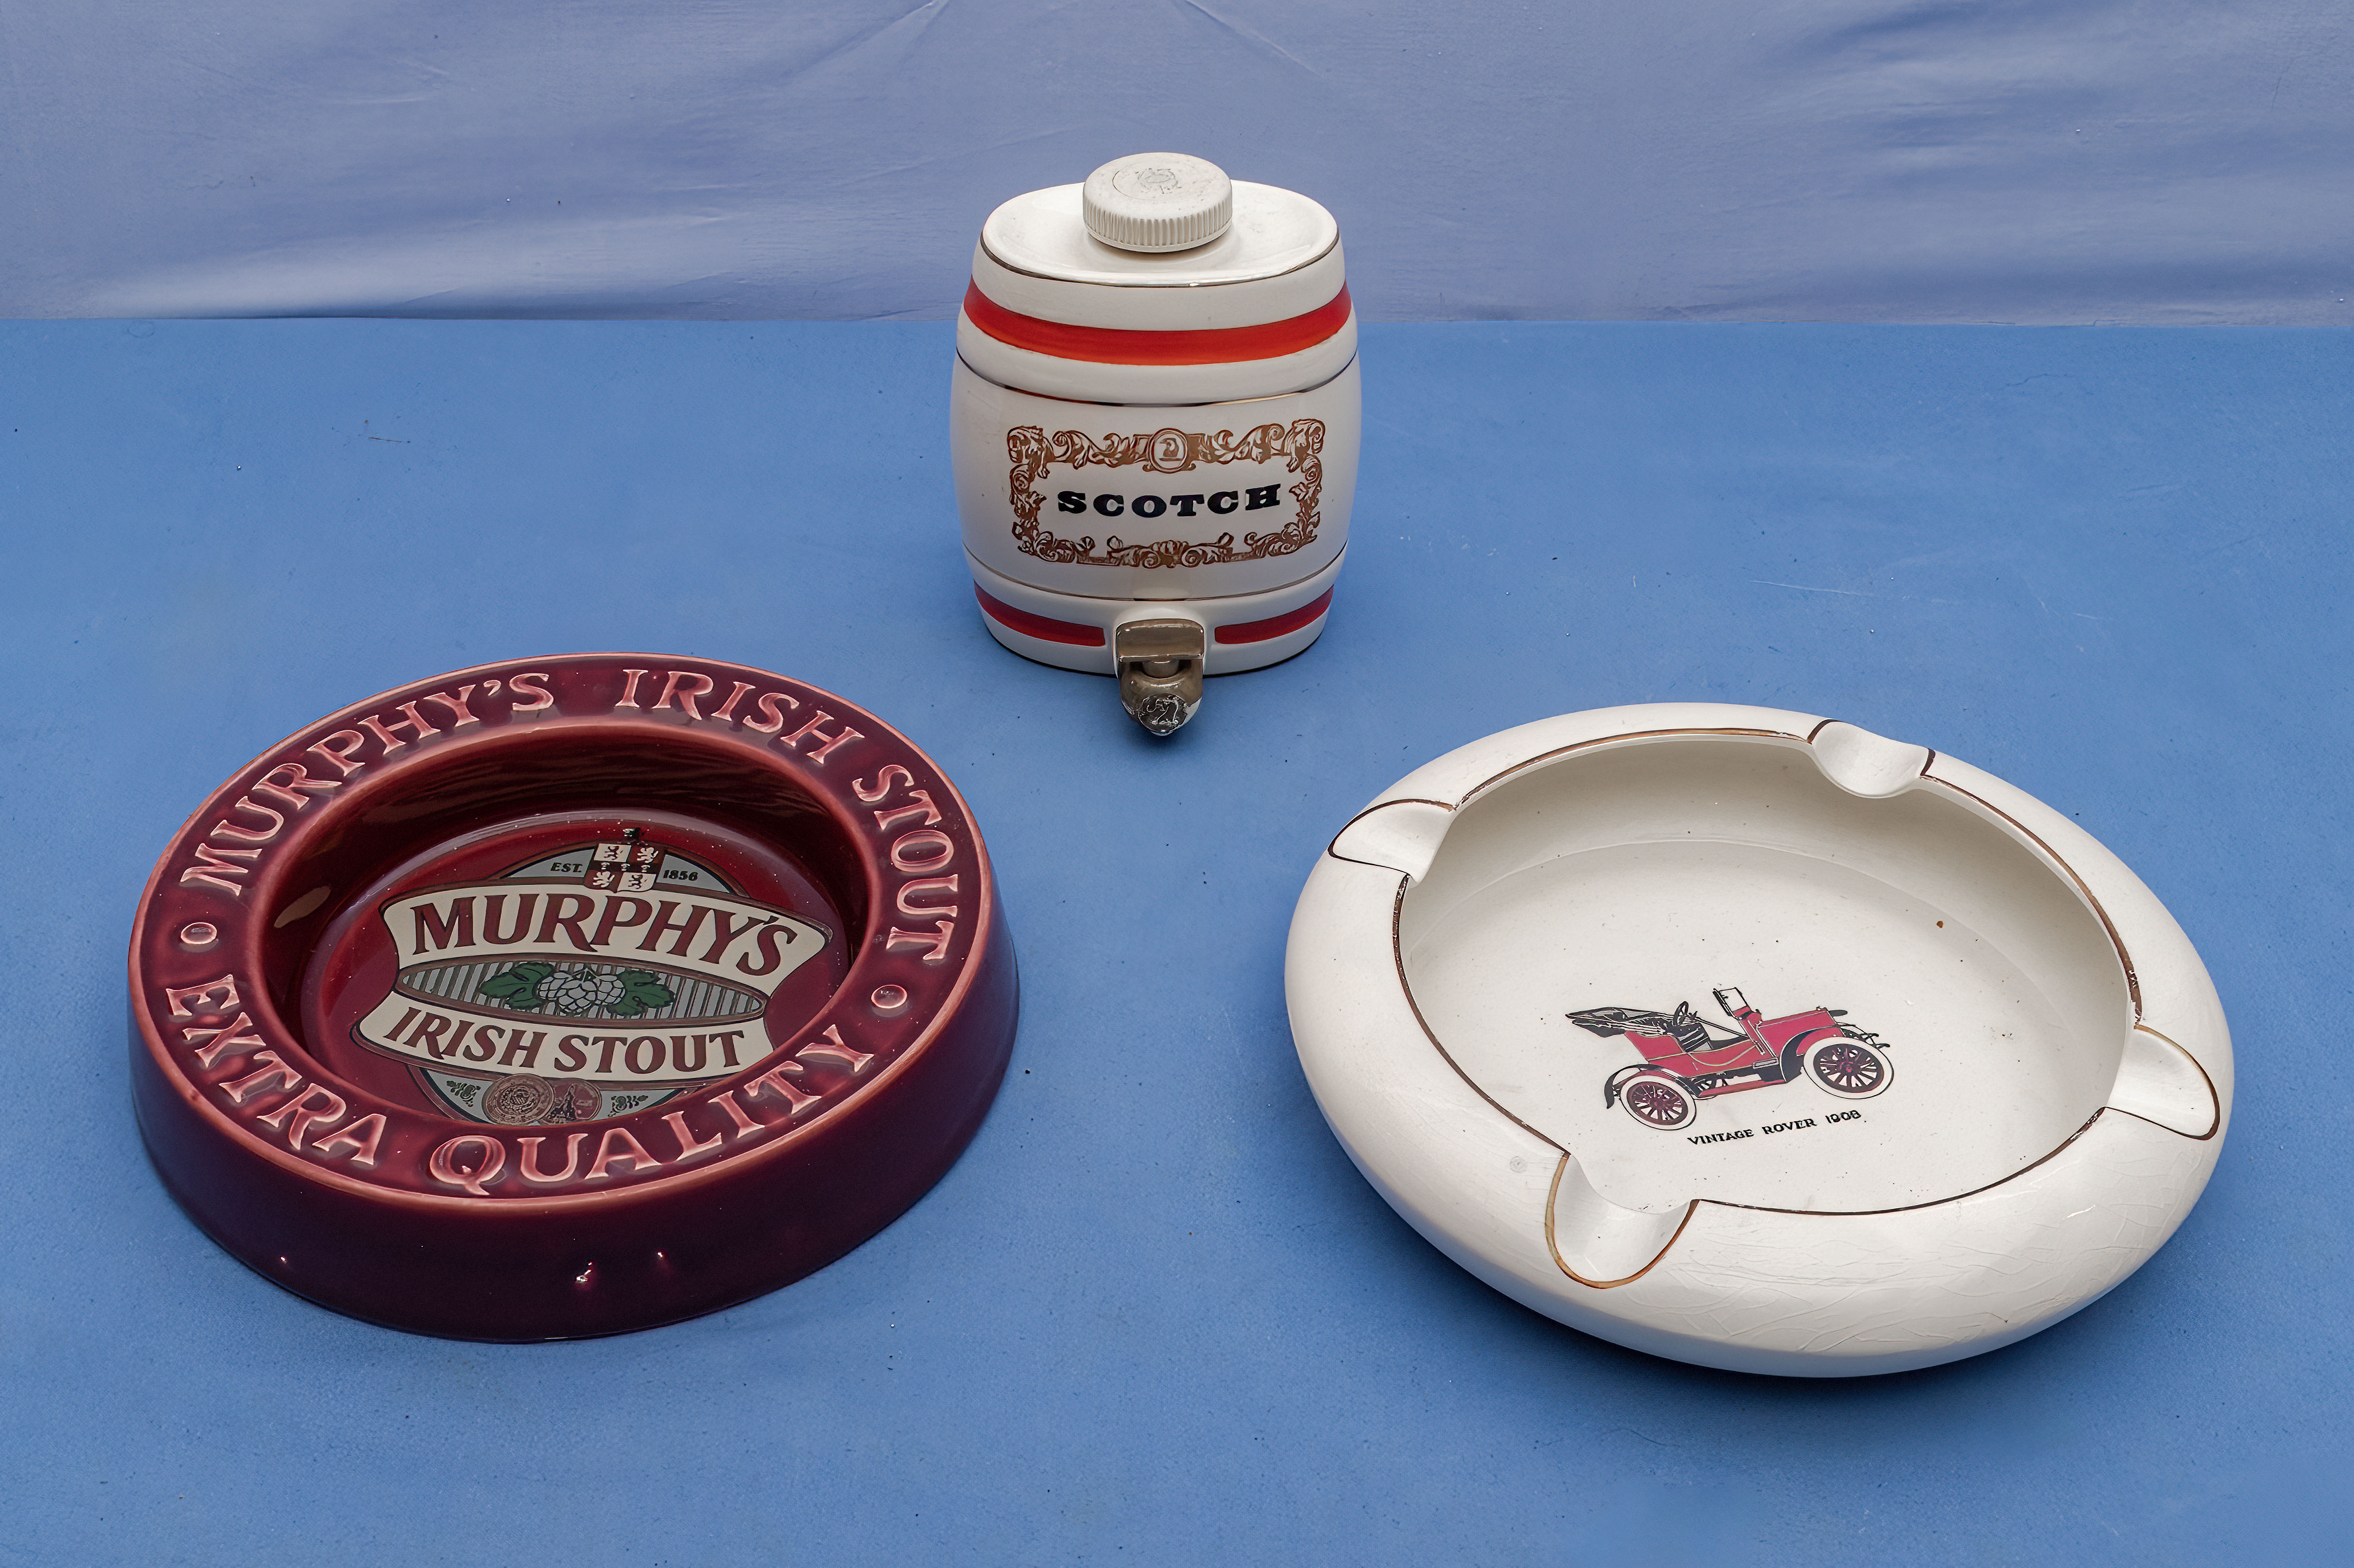 Two vintage ashtrays and a Scotch barrel